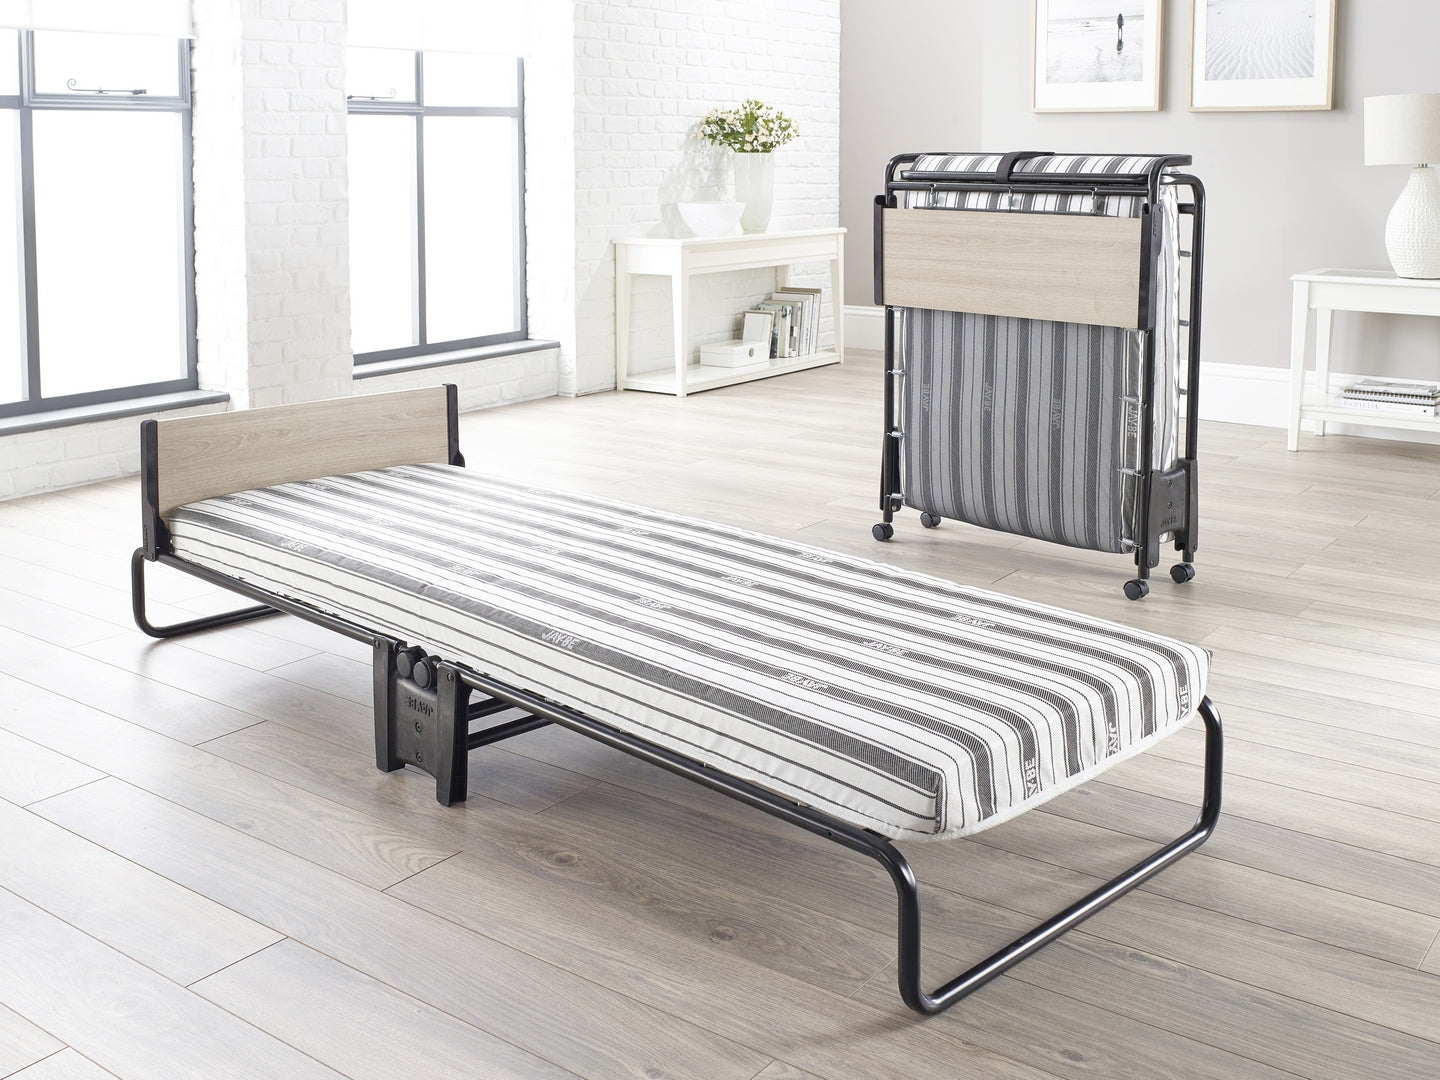 39" Jaybe Rollaway Bed 108943